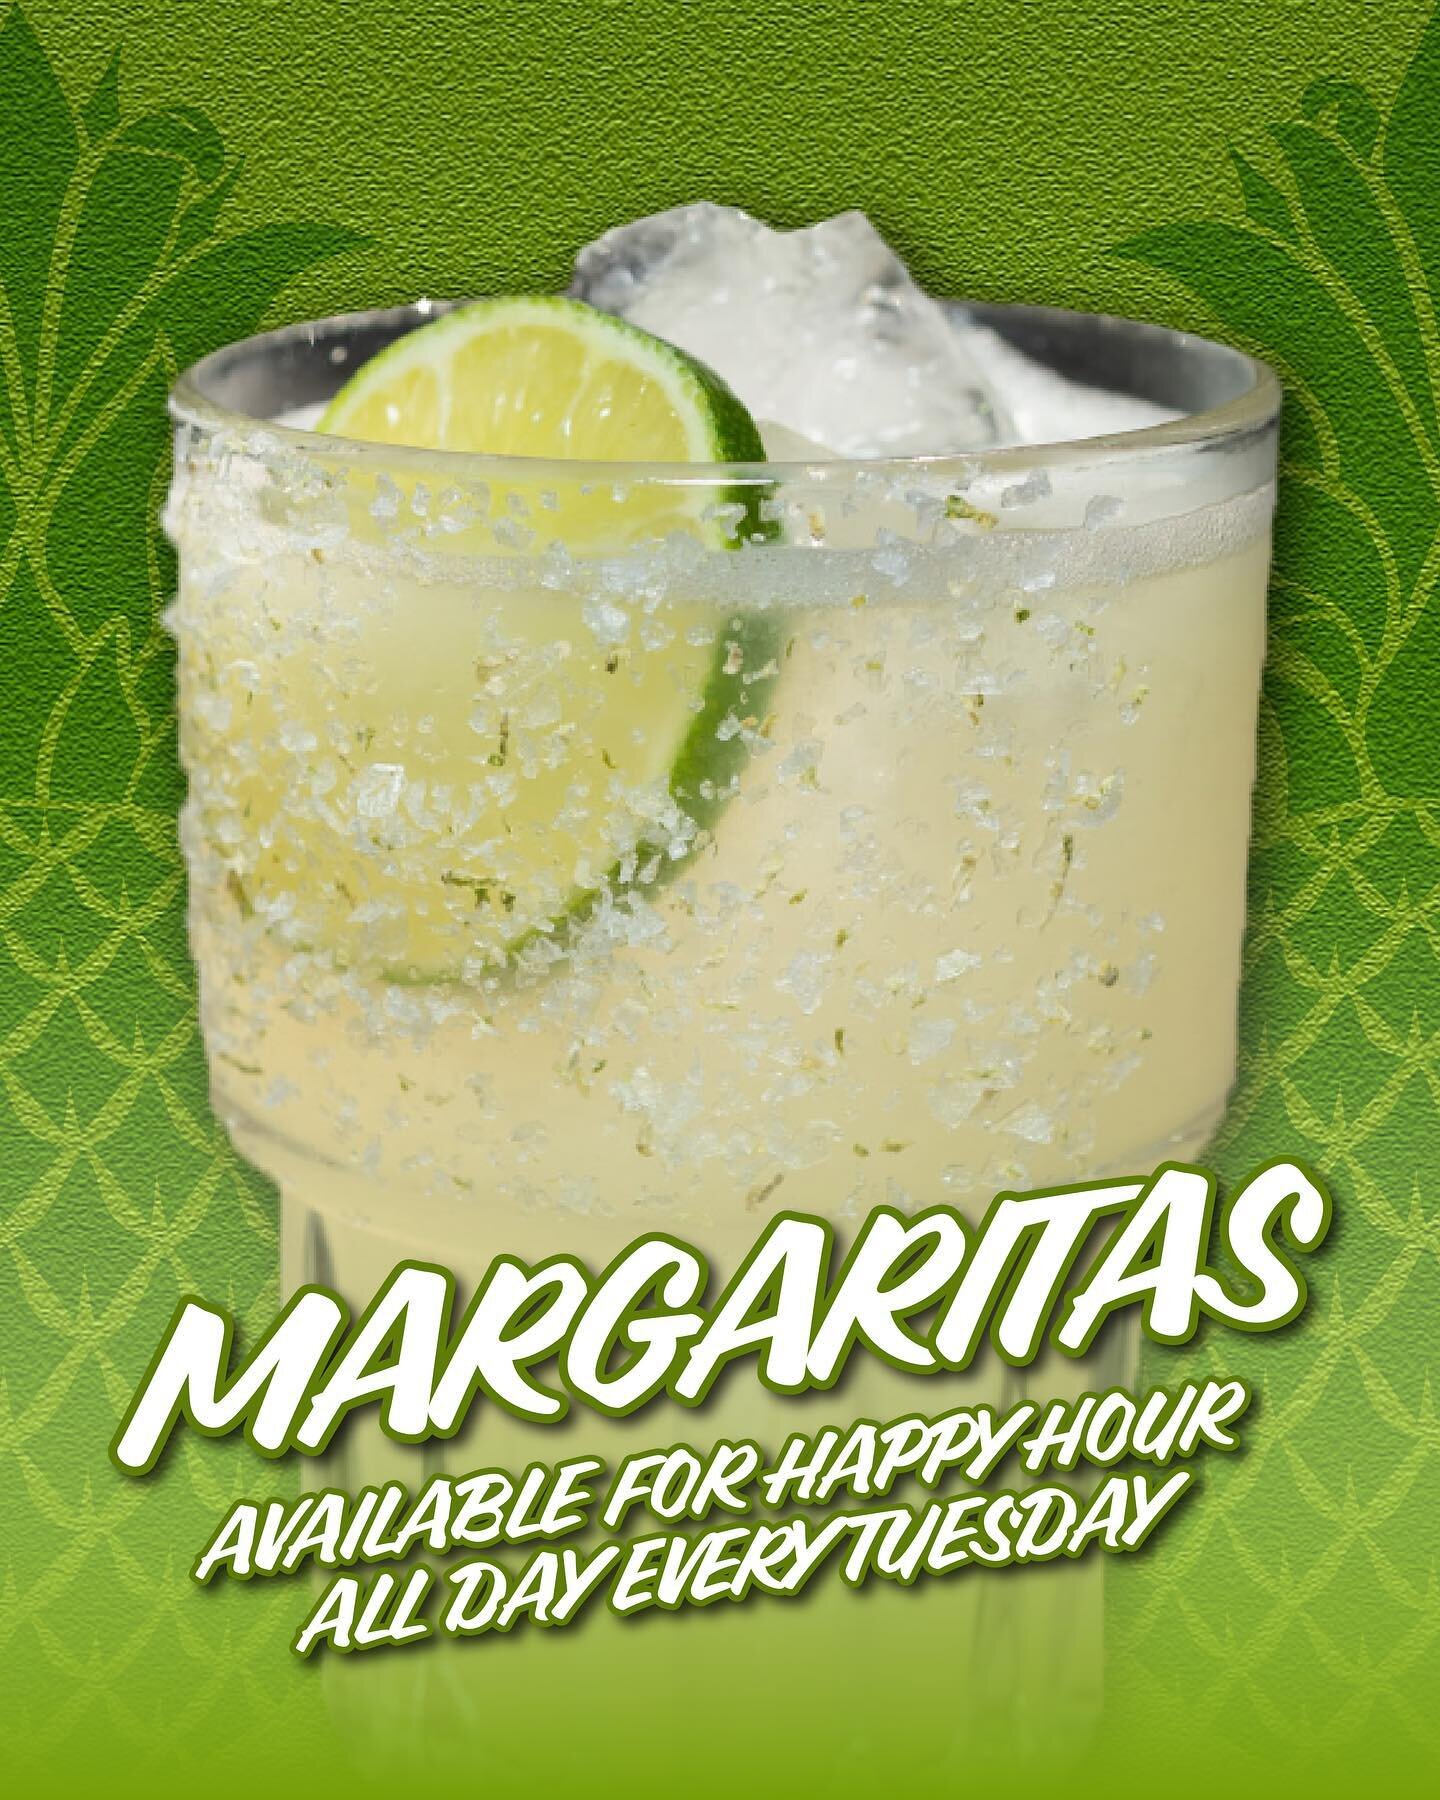 WASTED AWAY AGAIN IN MARGARITAVILLE 🎶

Tuesdays are for margaritas and tacos! Happy Hour starts at 4! Time to get your Taco Tuesday fix! See ya soon Tempe!